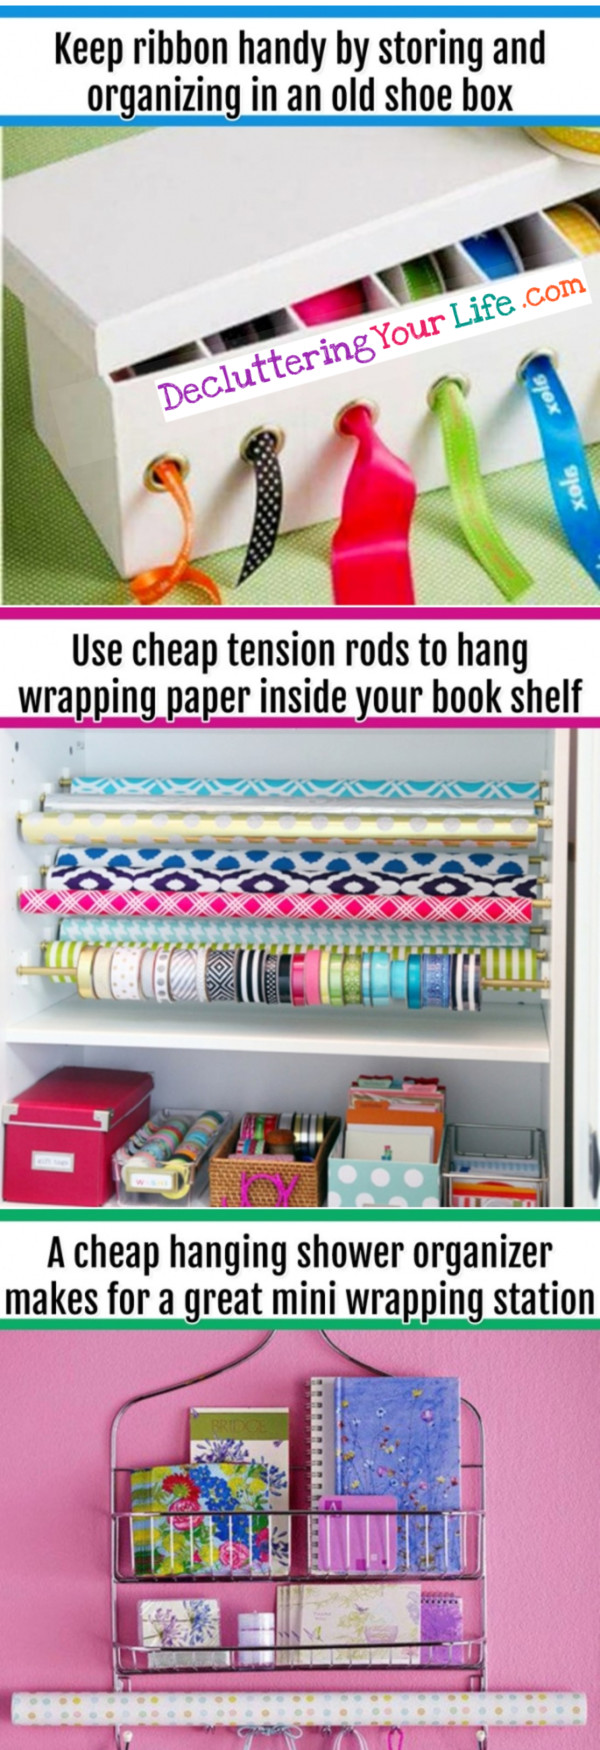 Wrapping supplies organization ideas - wrapping paper organization ideas and hacks for all your gift wrapping supplies.  VERY use DIY organization tips, hacks and ideas